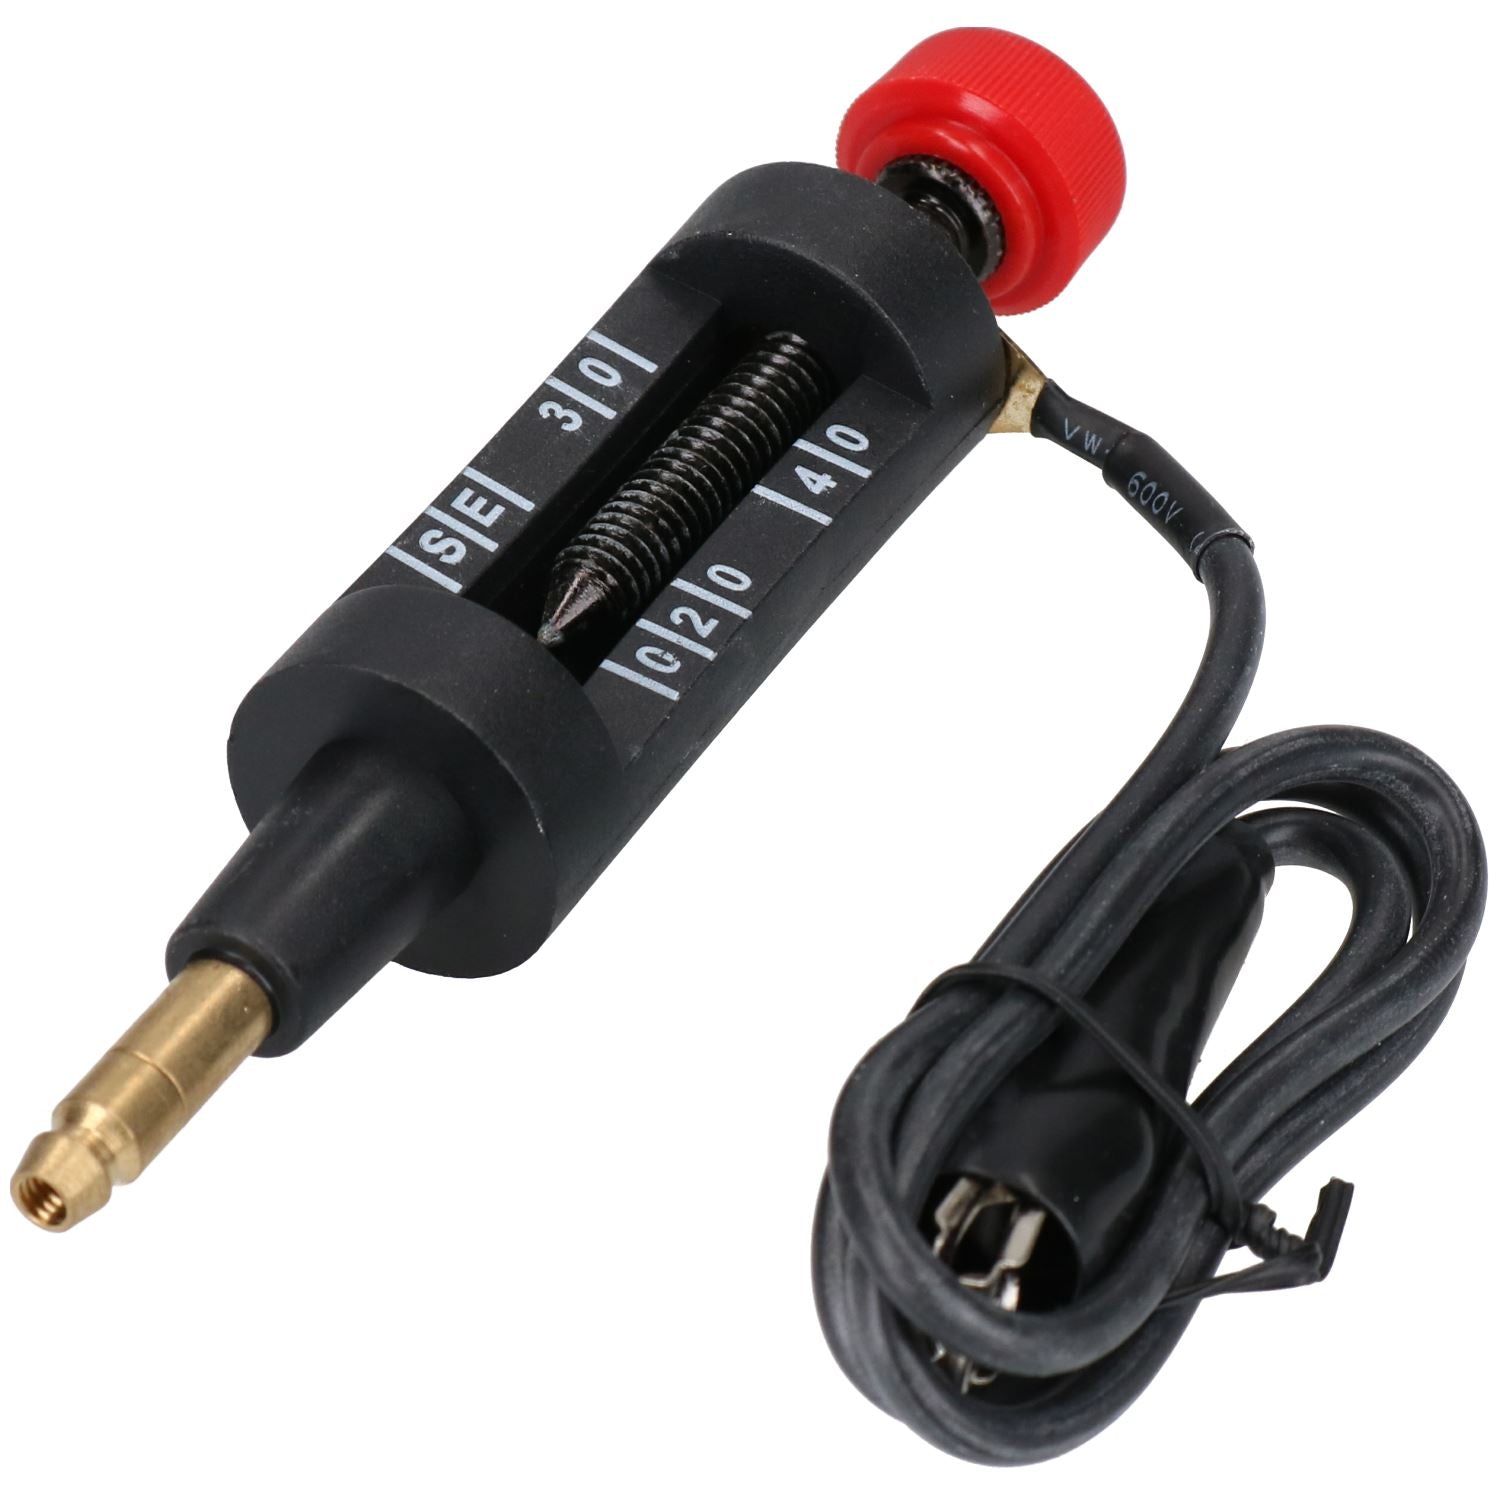 Auto Ignition Spark Plug Coil Tester In Line Test Lead HT lead For Cars / Bikes etc